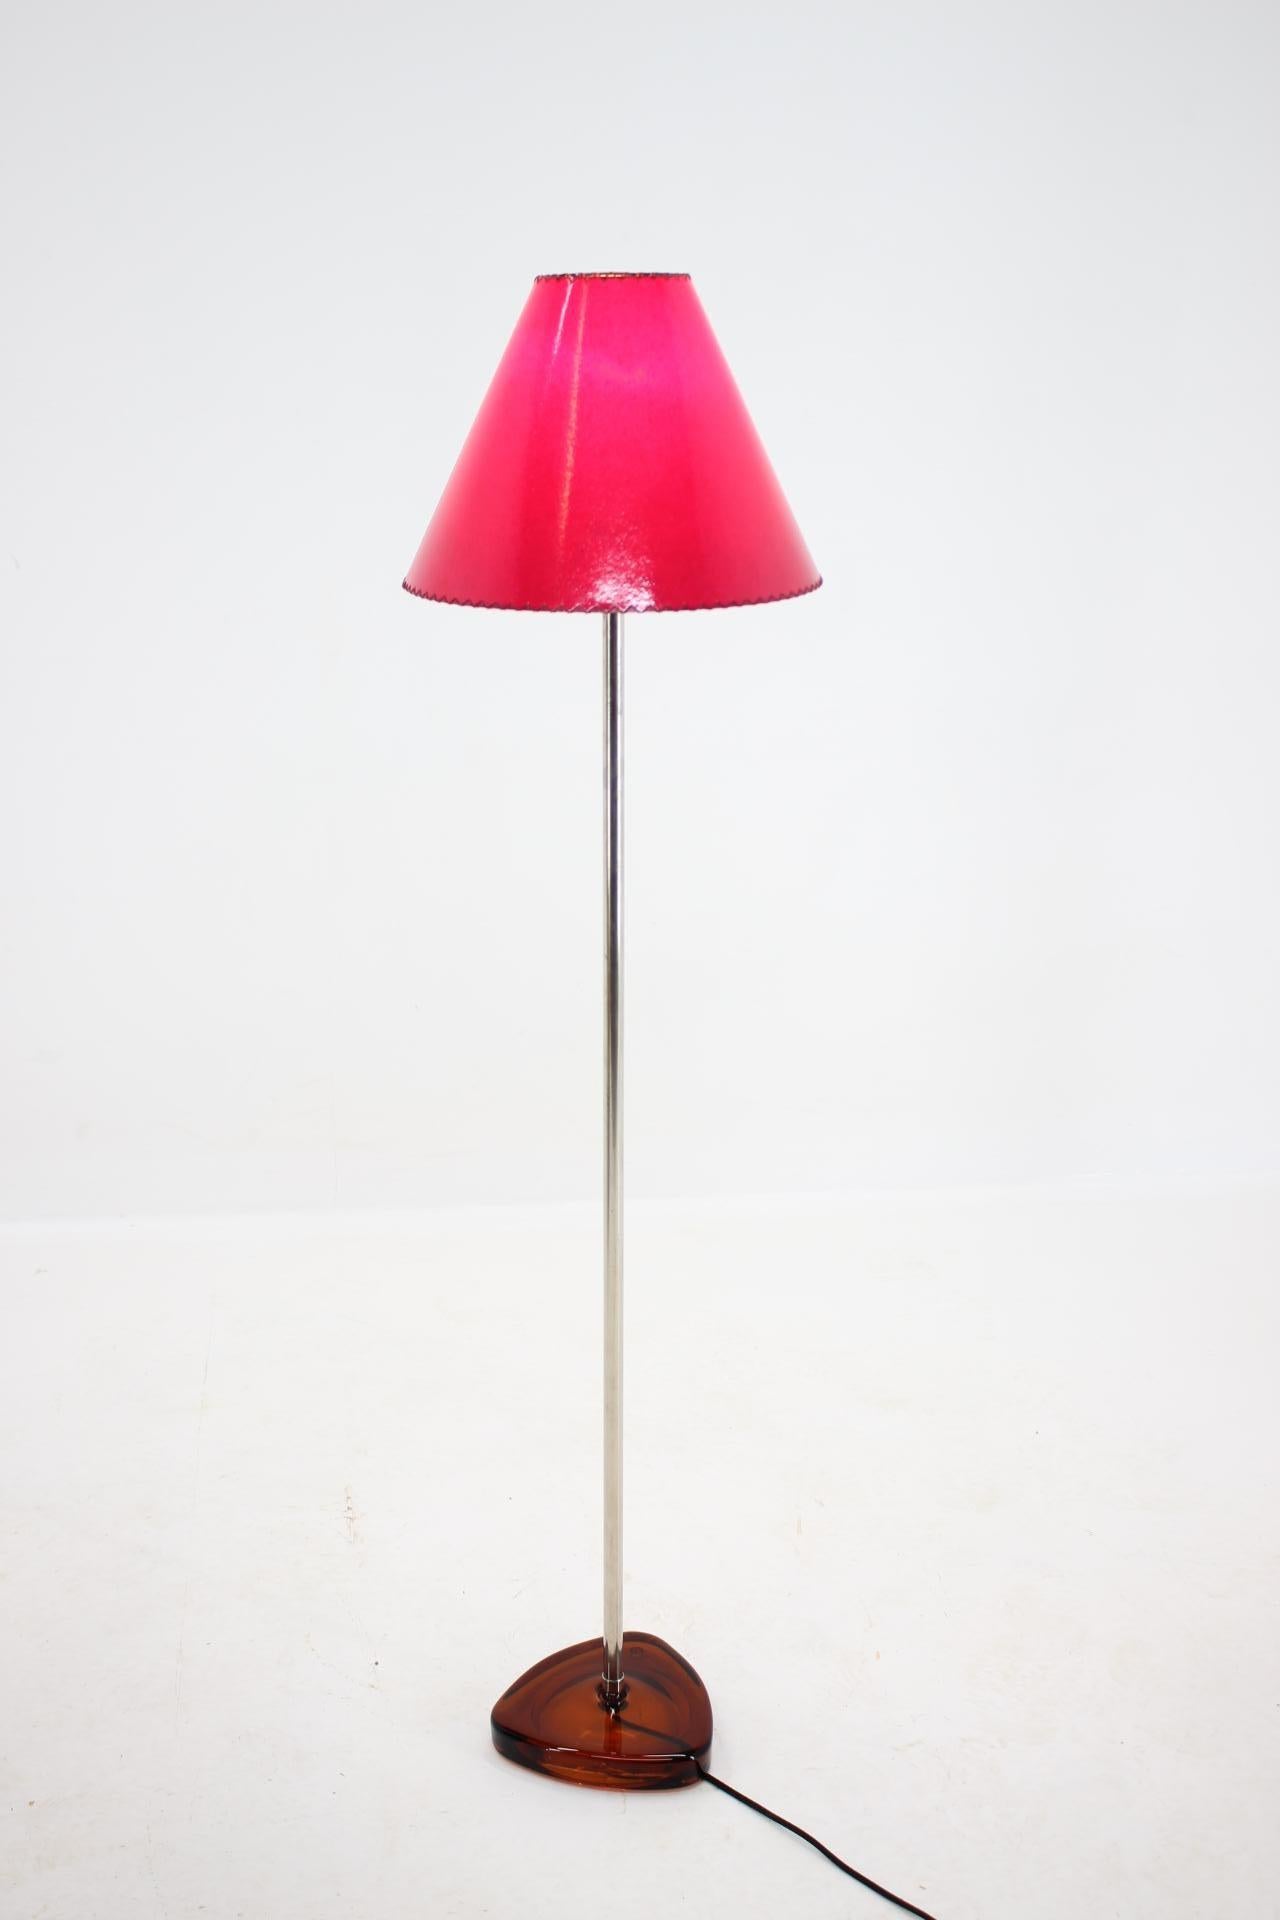 - New handmade lampshade from hand made paper
- Newly rewired
- Plug adapter included for US order
- Stand 23 cm.
 